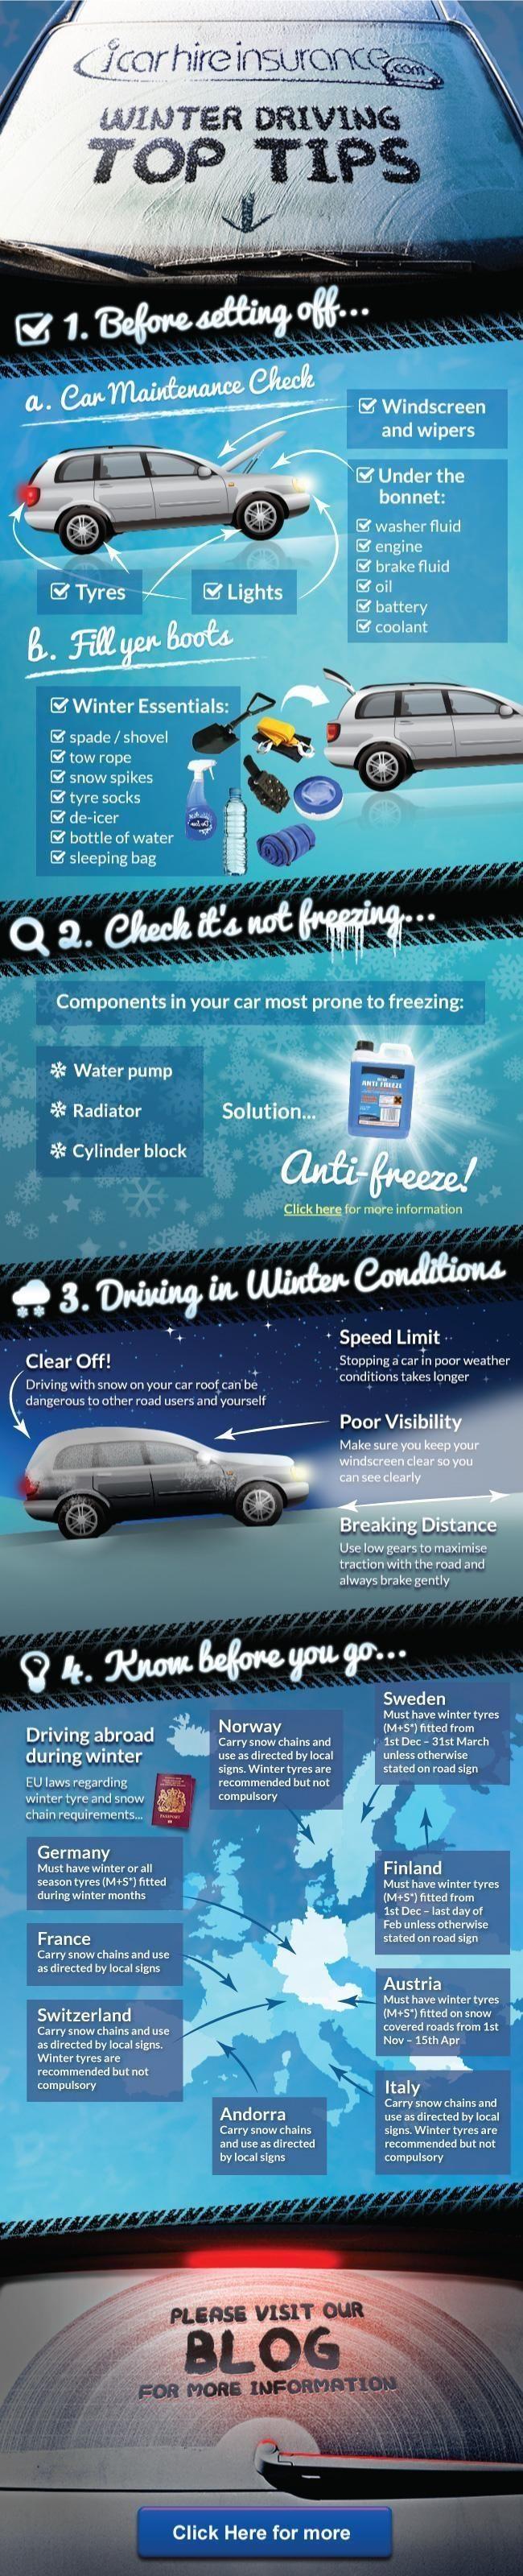 Winter Driving Tips from iCarhireinsurance.com